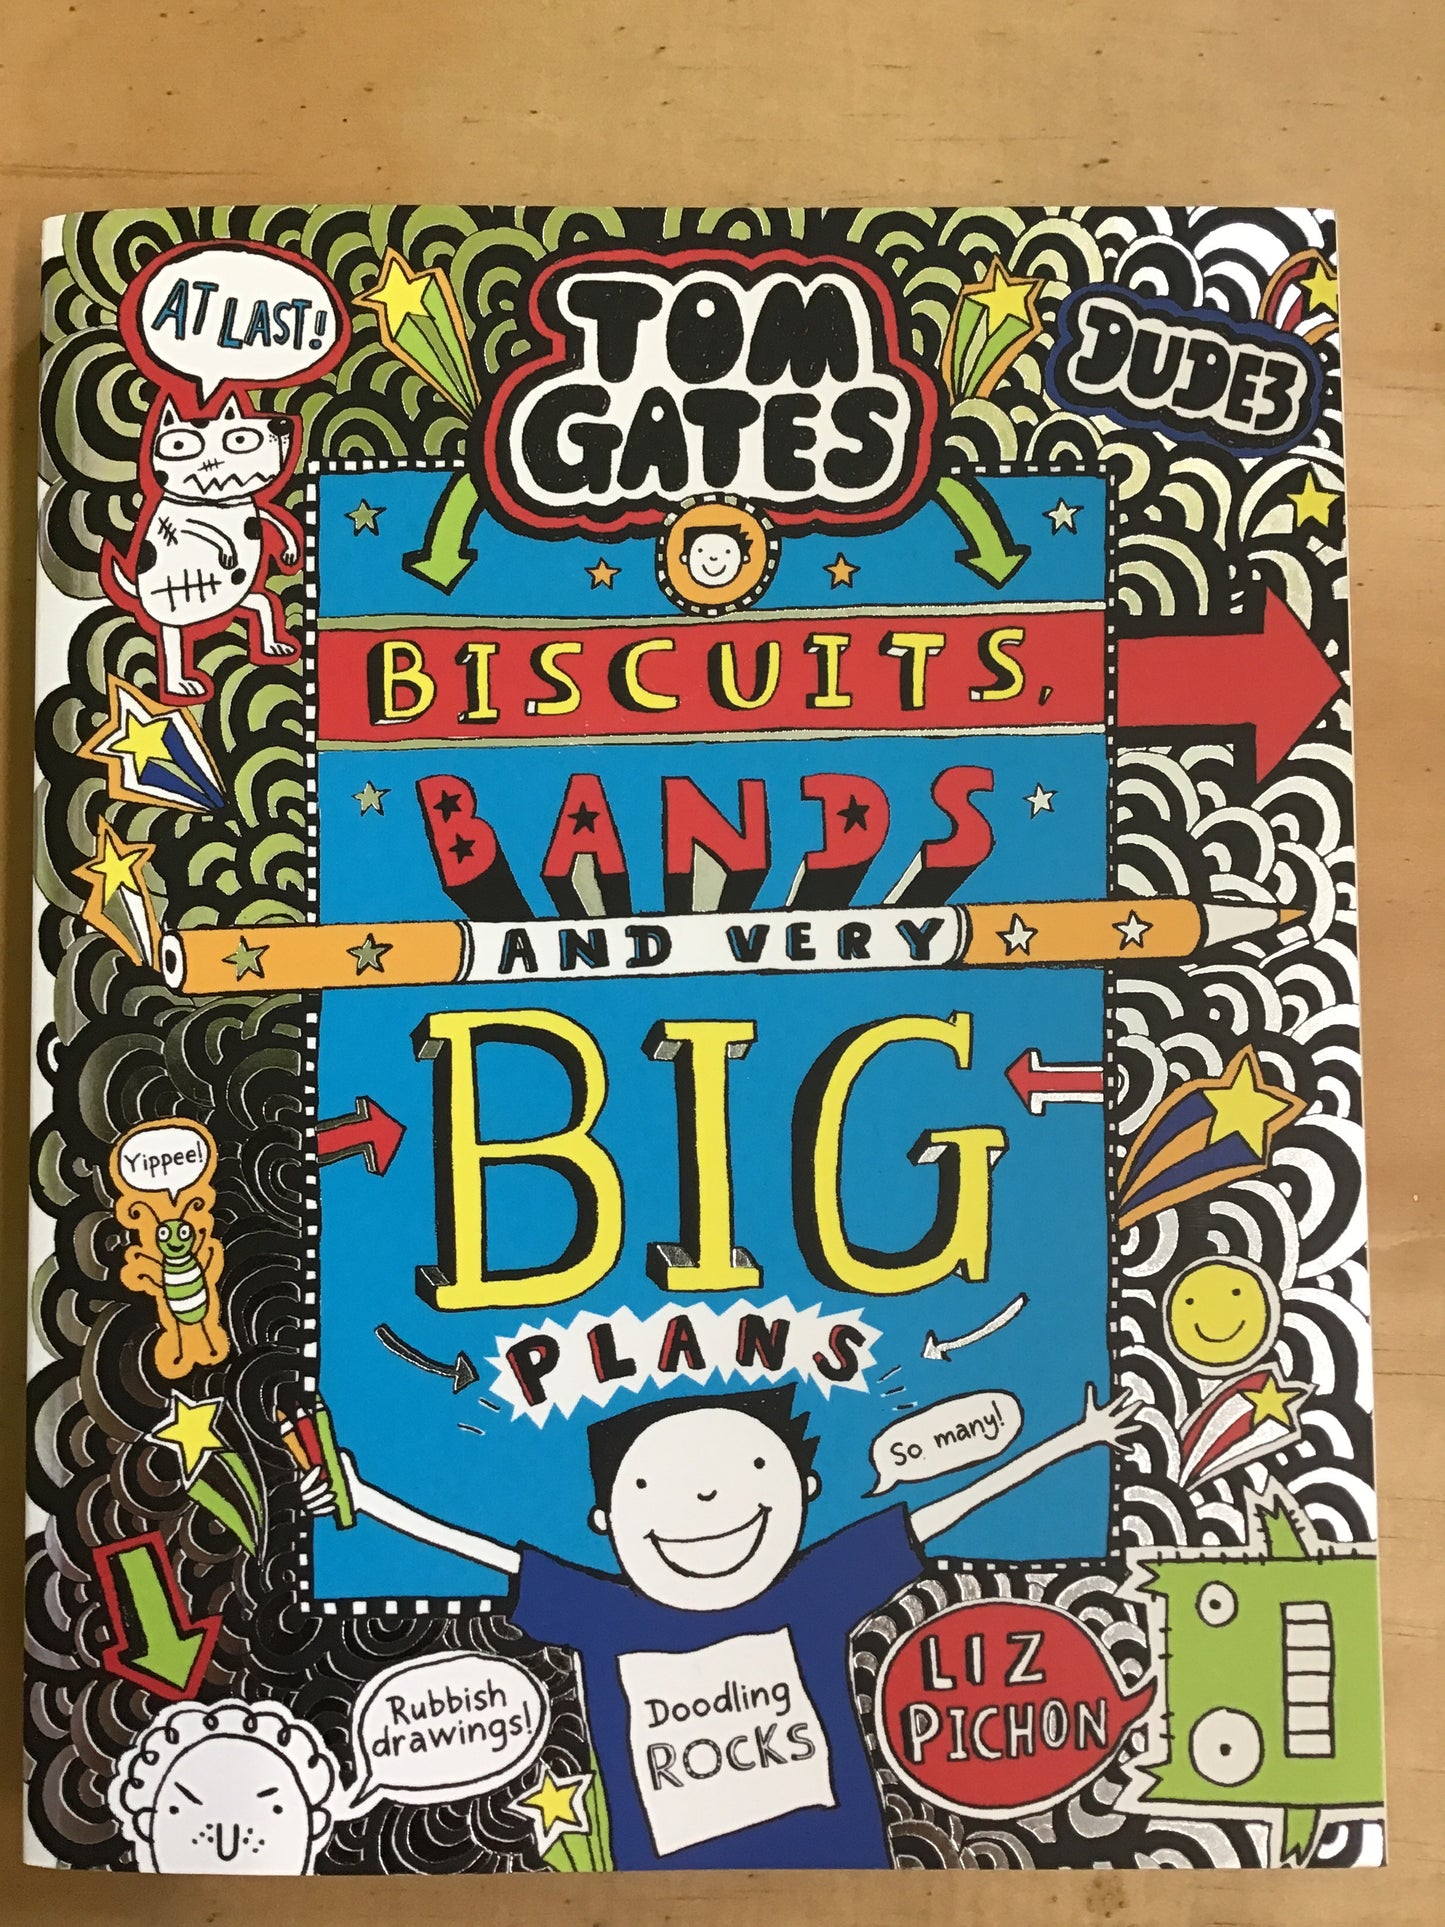 Tom Gates: Biscuits, Bands and very Big Plans